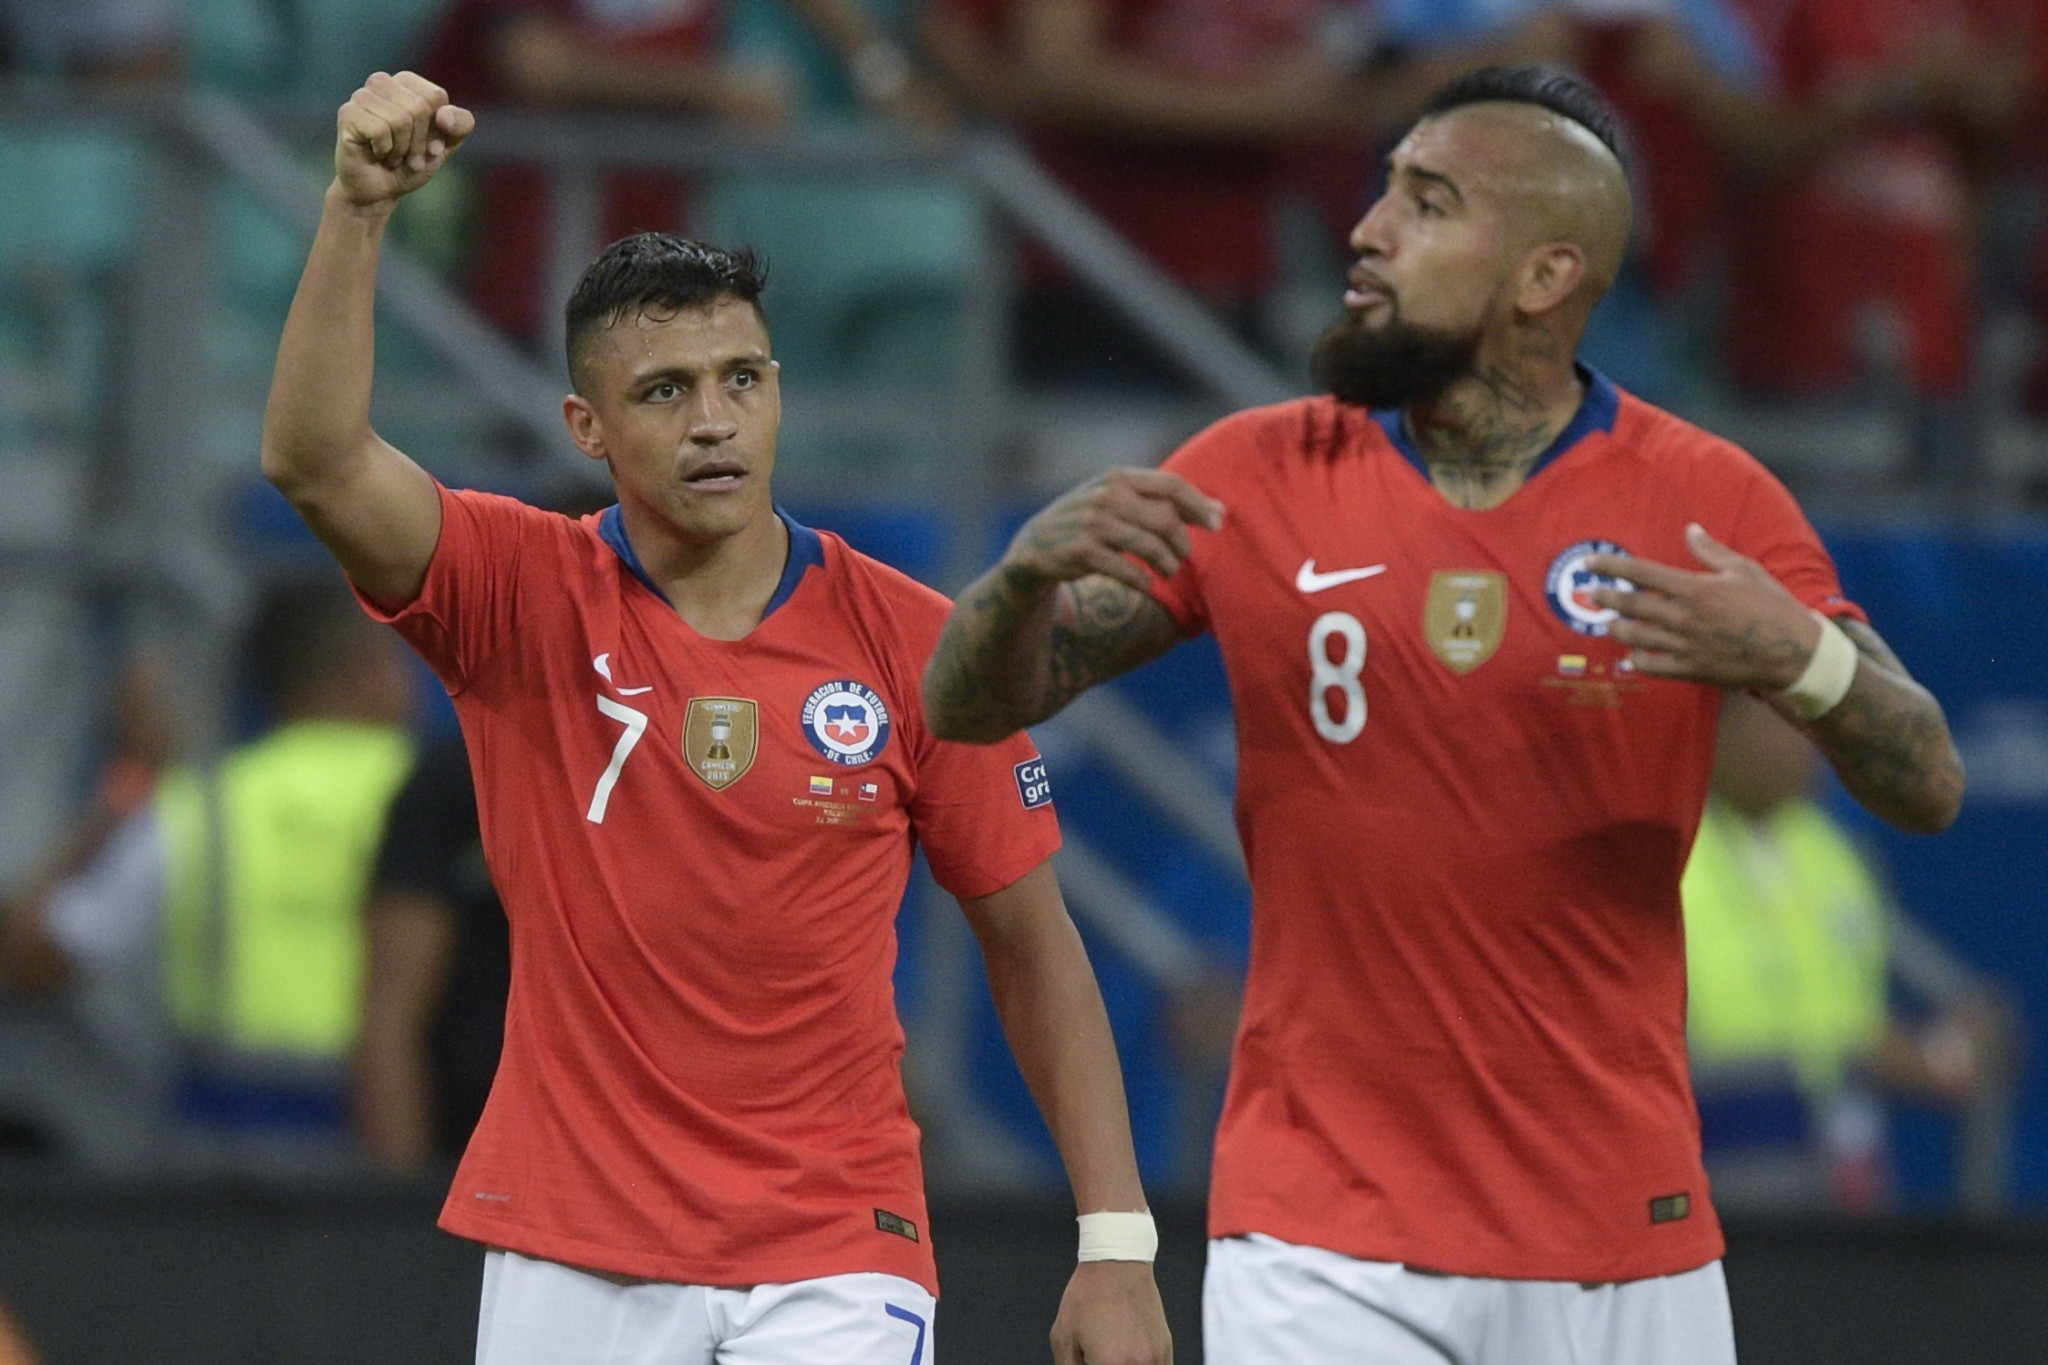 Alexis Sánchez scored in a second successive match as Chile qualified for the quarter-finals of the Copa América ©Getty Images